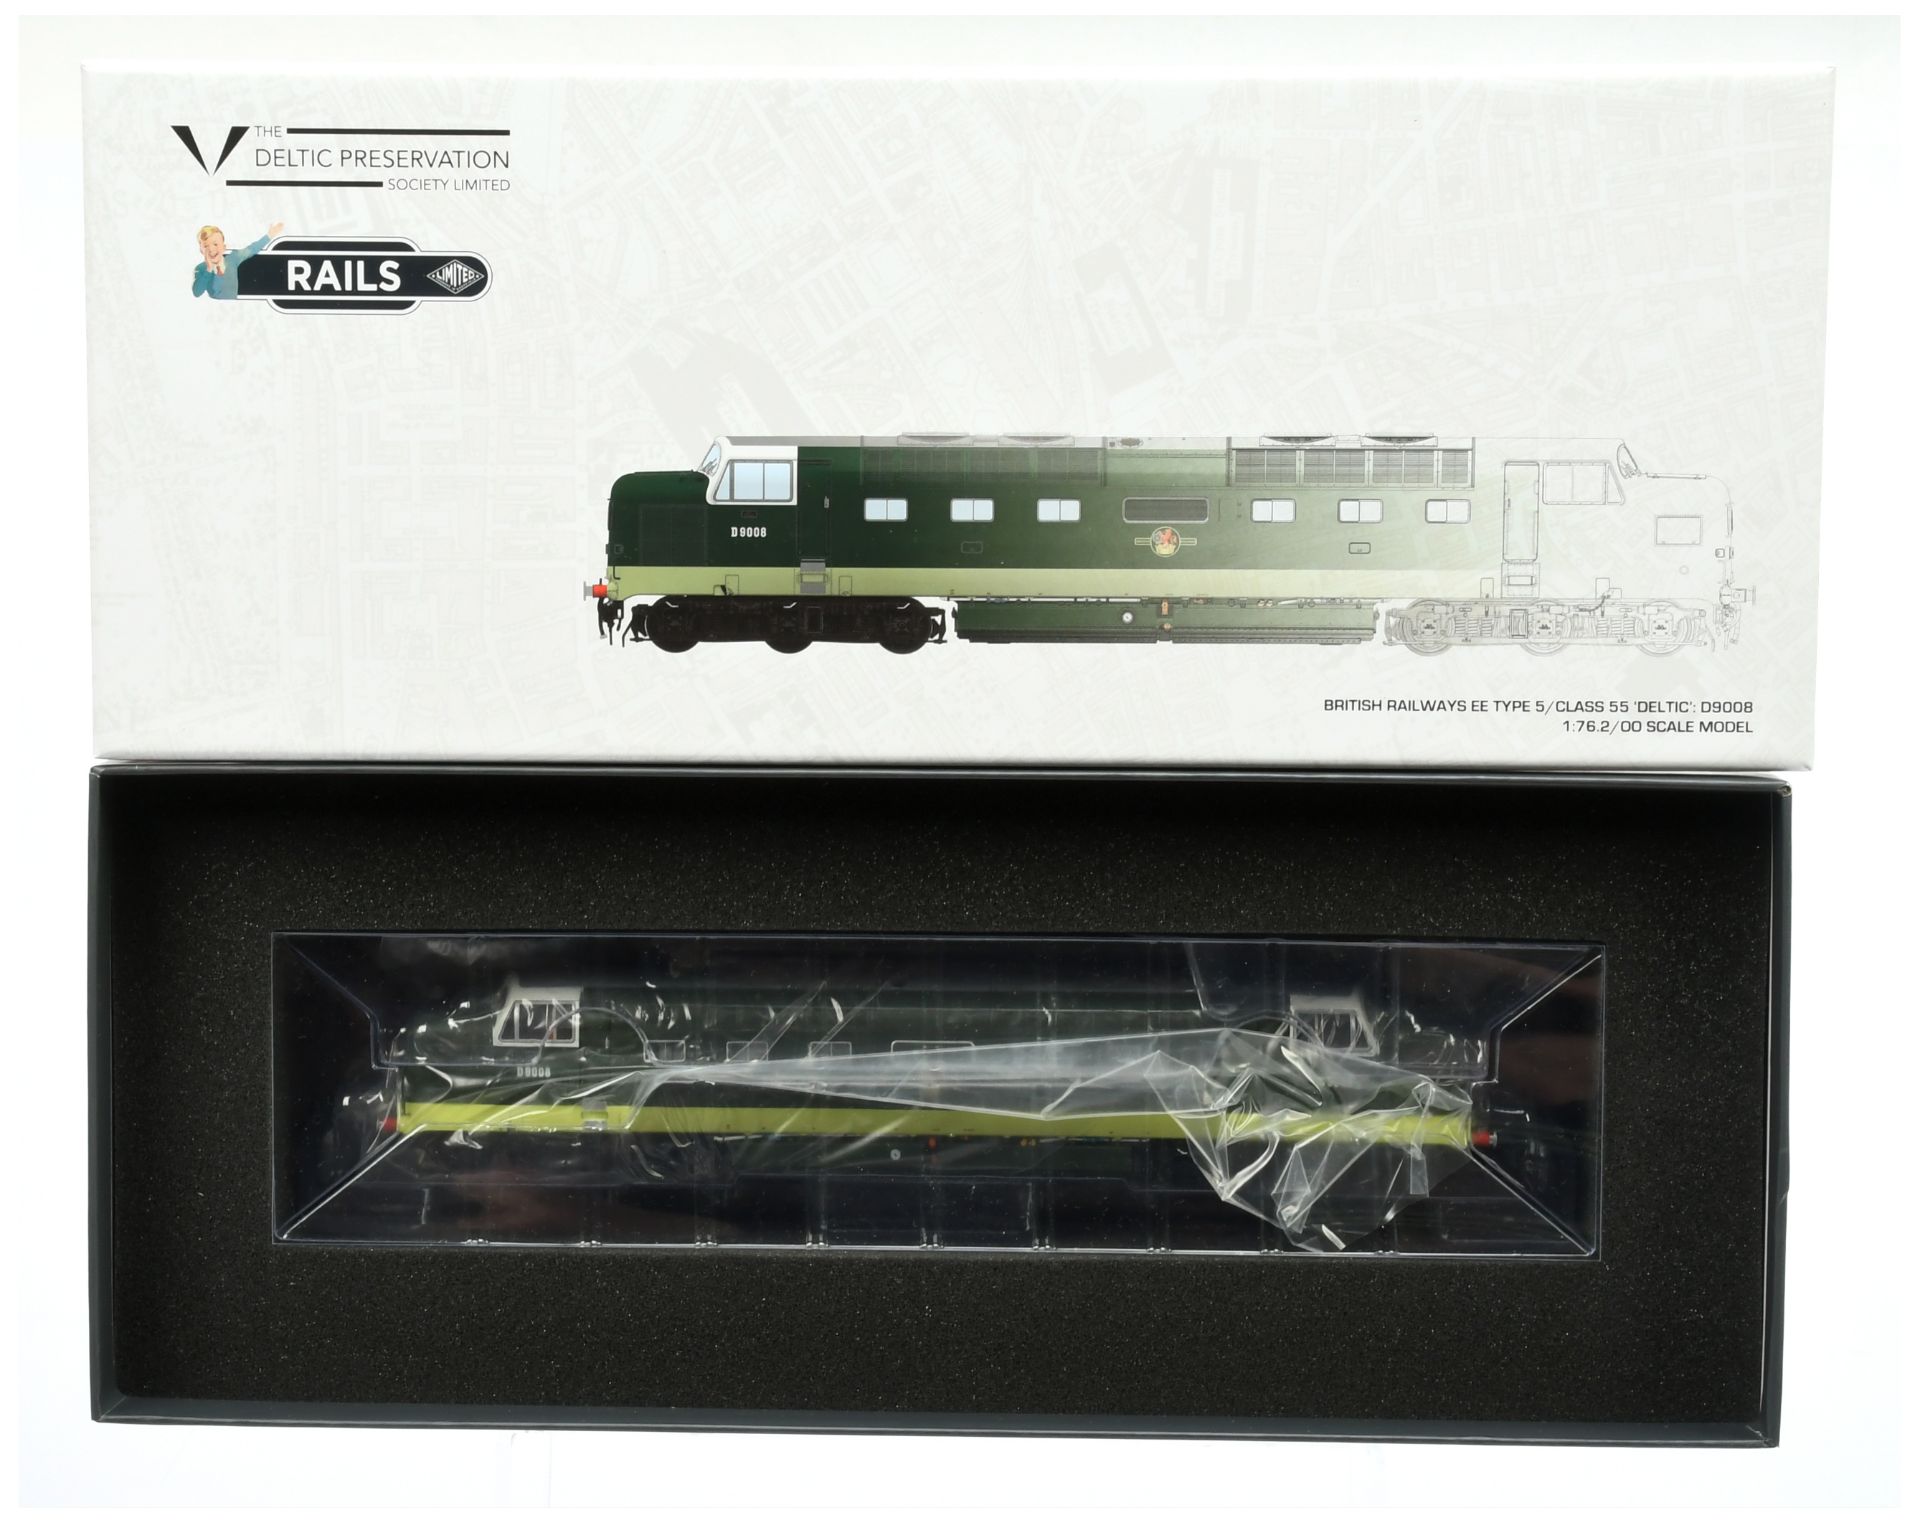 Accurascale BR Class 55 Diesel Locomotive D9008 "Deltic" - Image 2 of 2